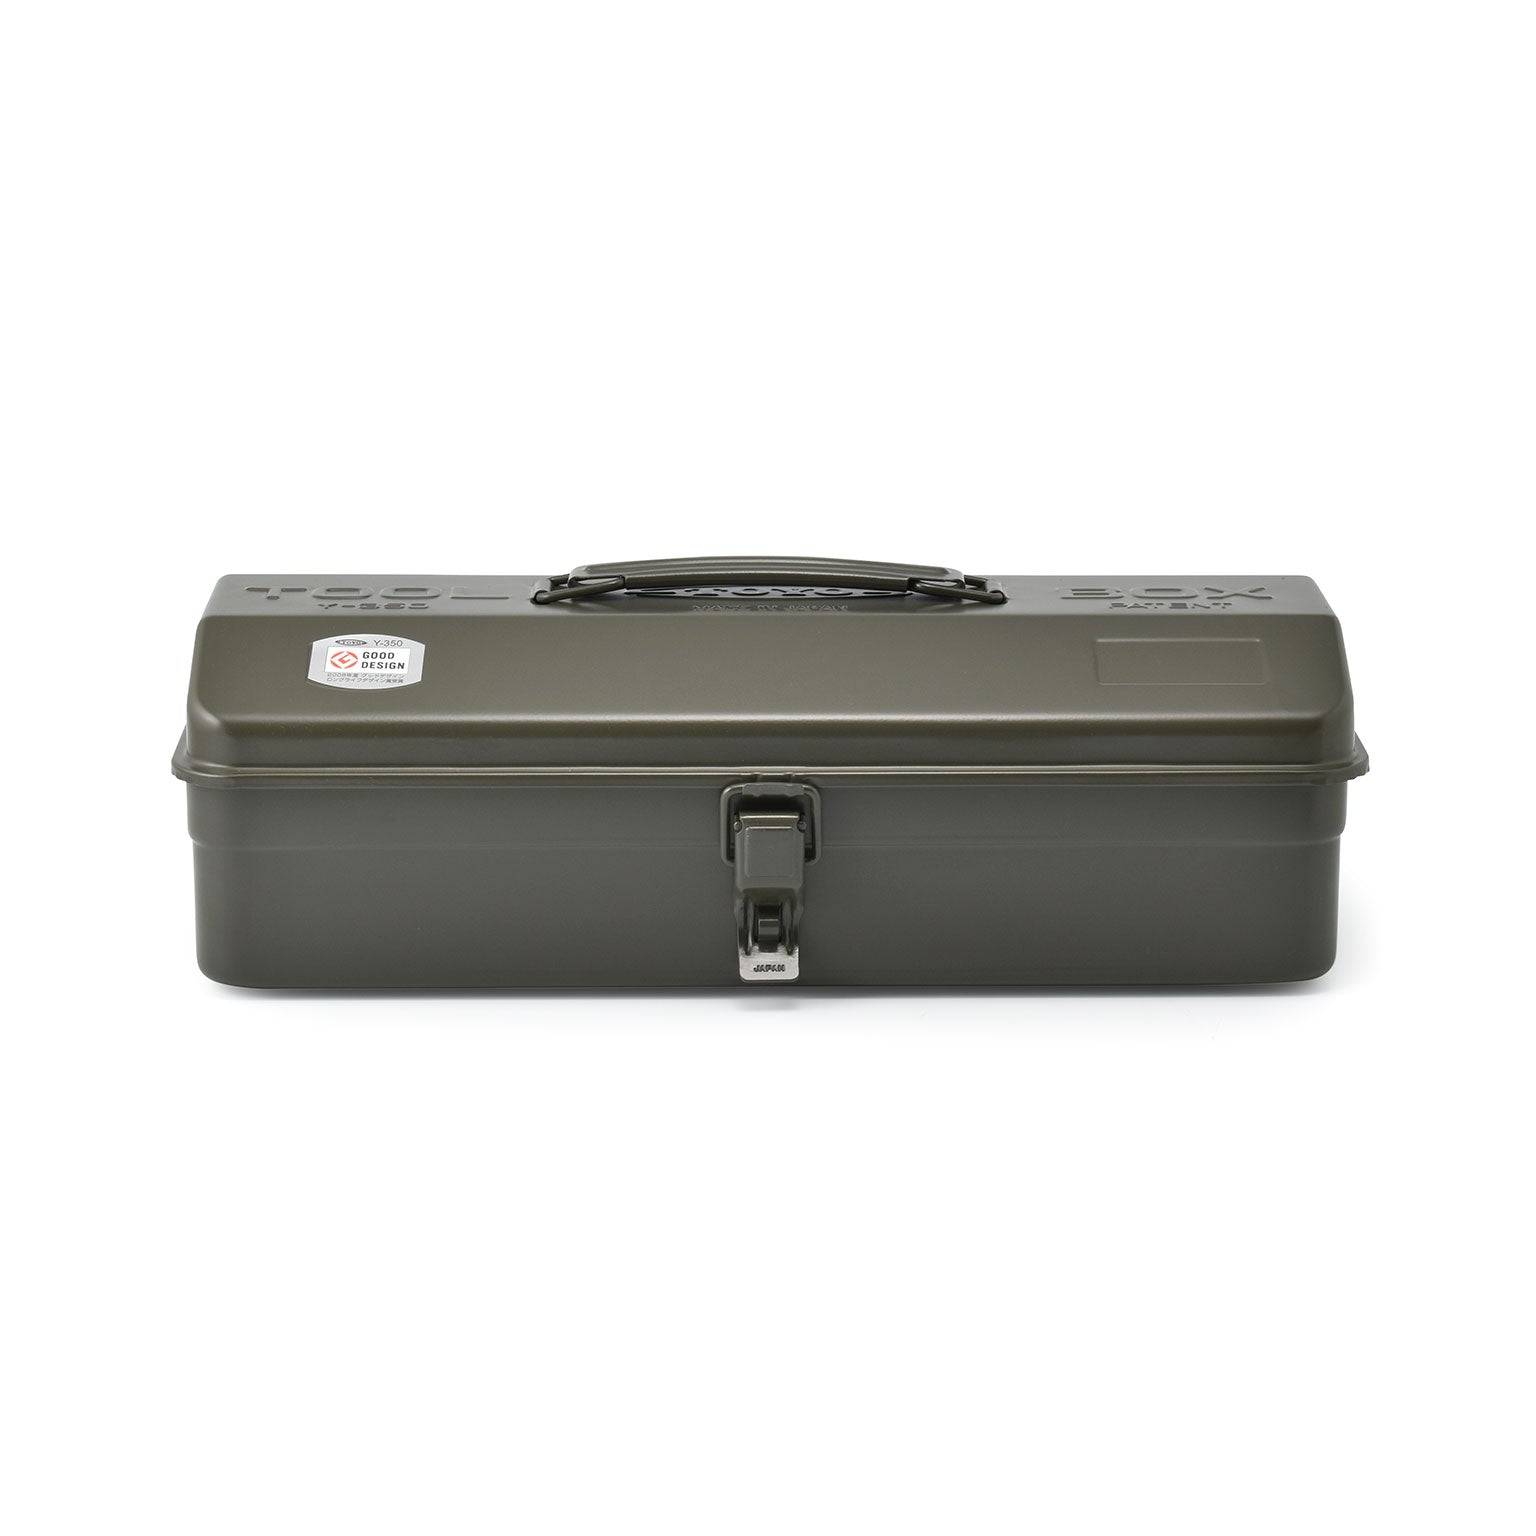 [In stock｜Free Shipping in Hong Kong]TOYO-Y-350 Portable Mountain Type Iron Tool Box丨Made in Japan丨Color Series